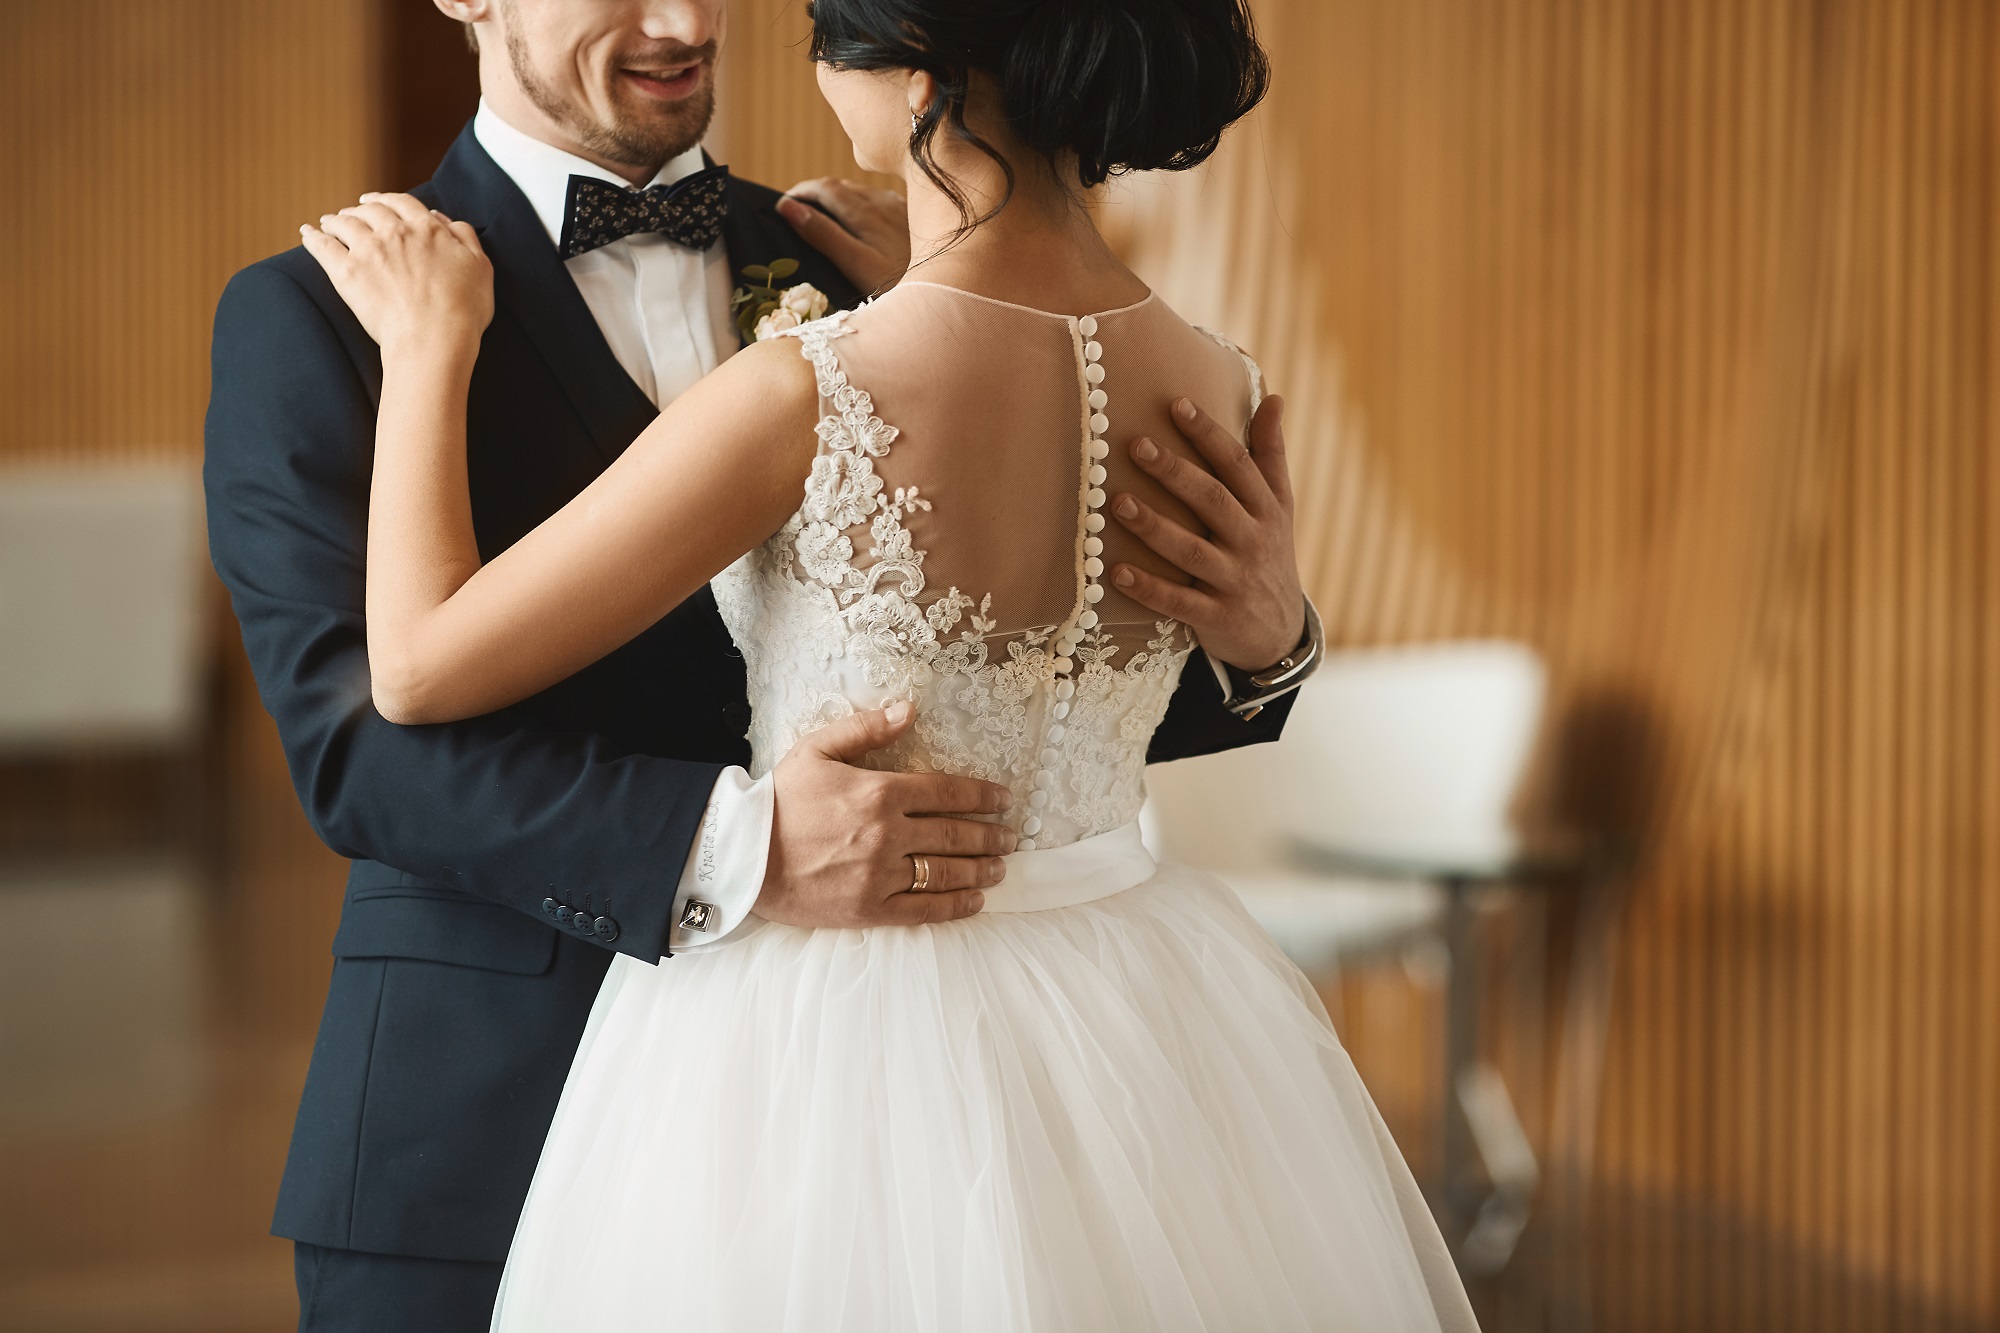 Choose-the-right-wedding-dress-for-your-first-dance-says-the-wedding-dress-dry-cleaning-expert-in-orange-county